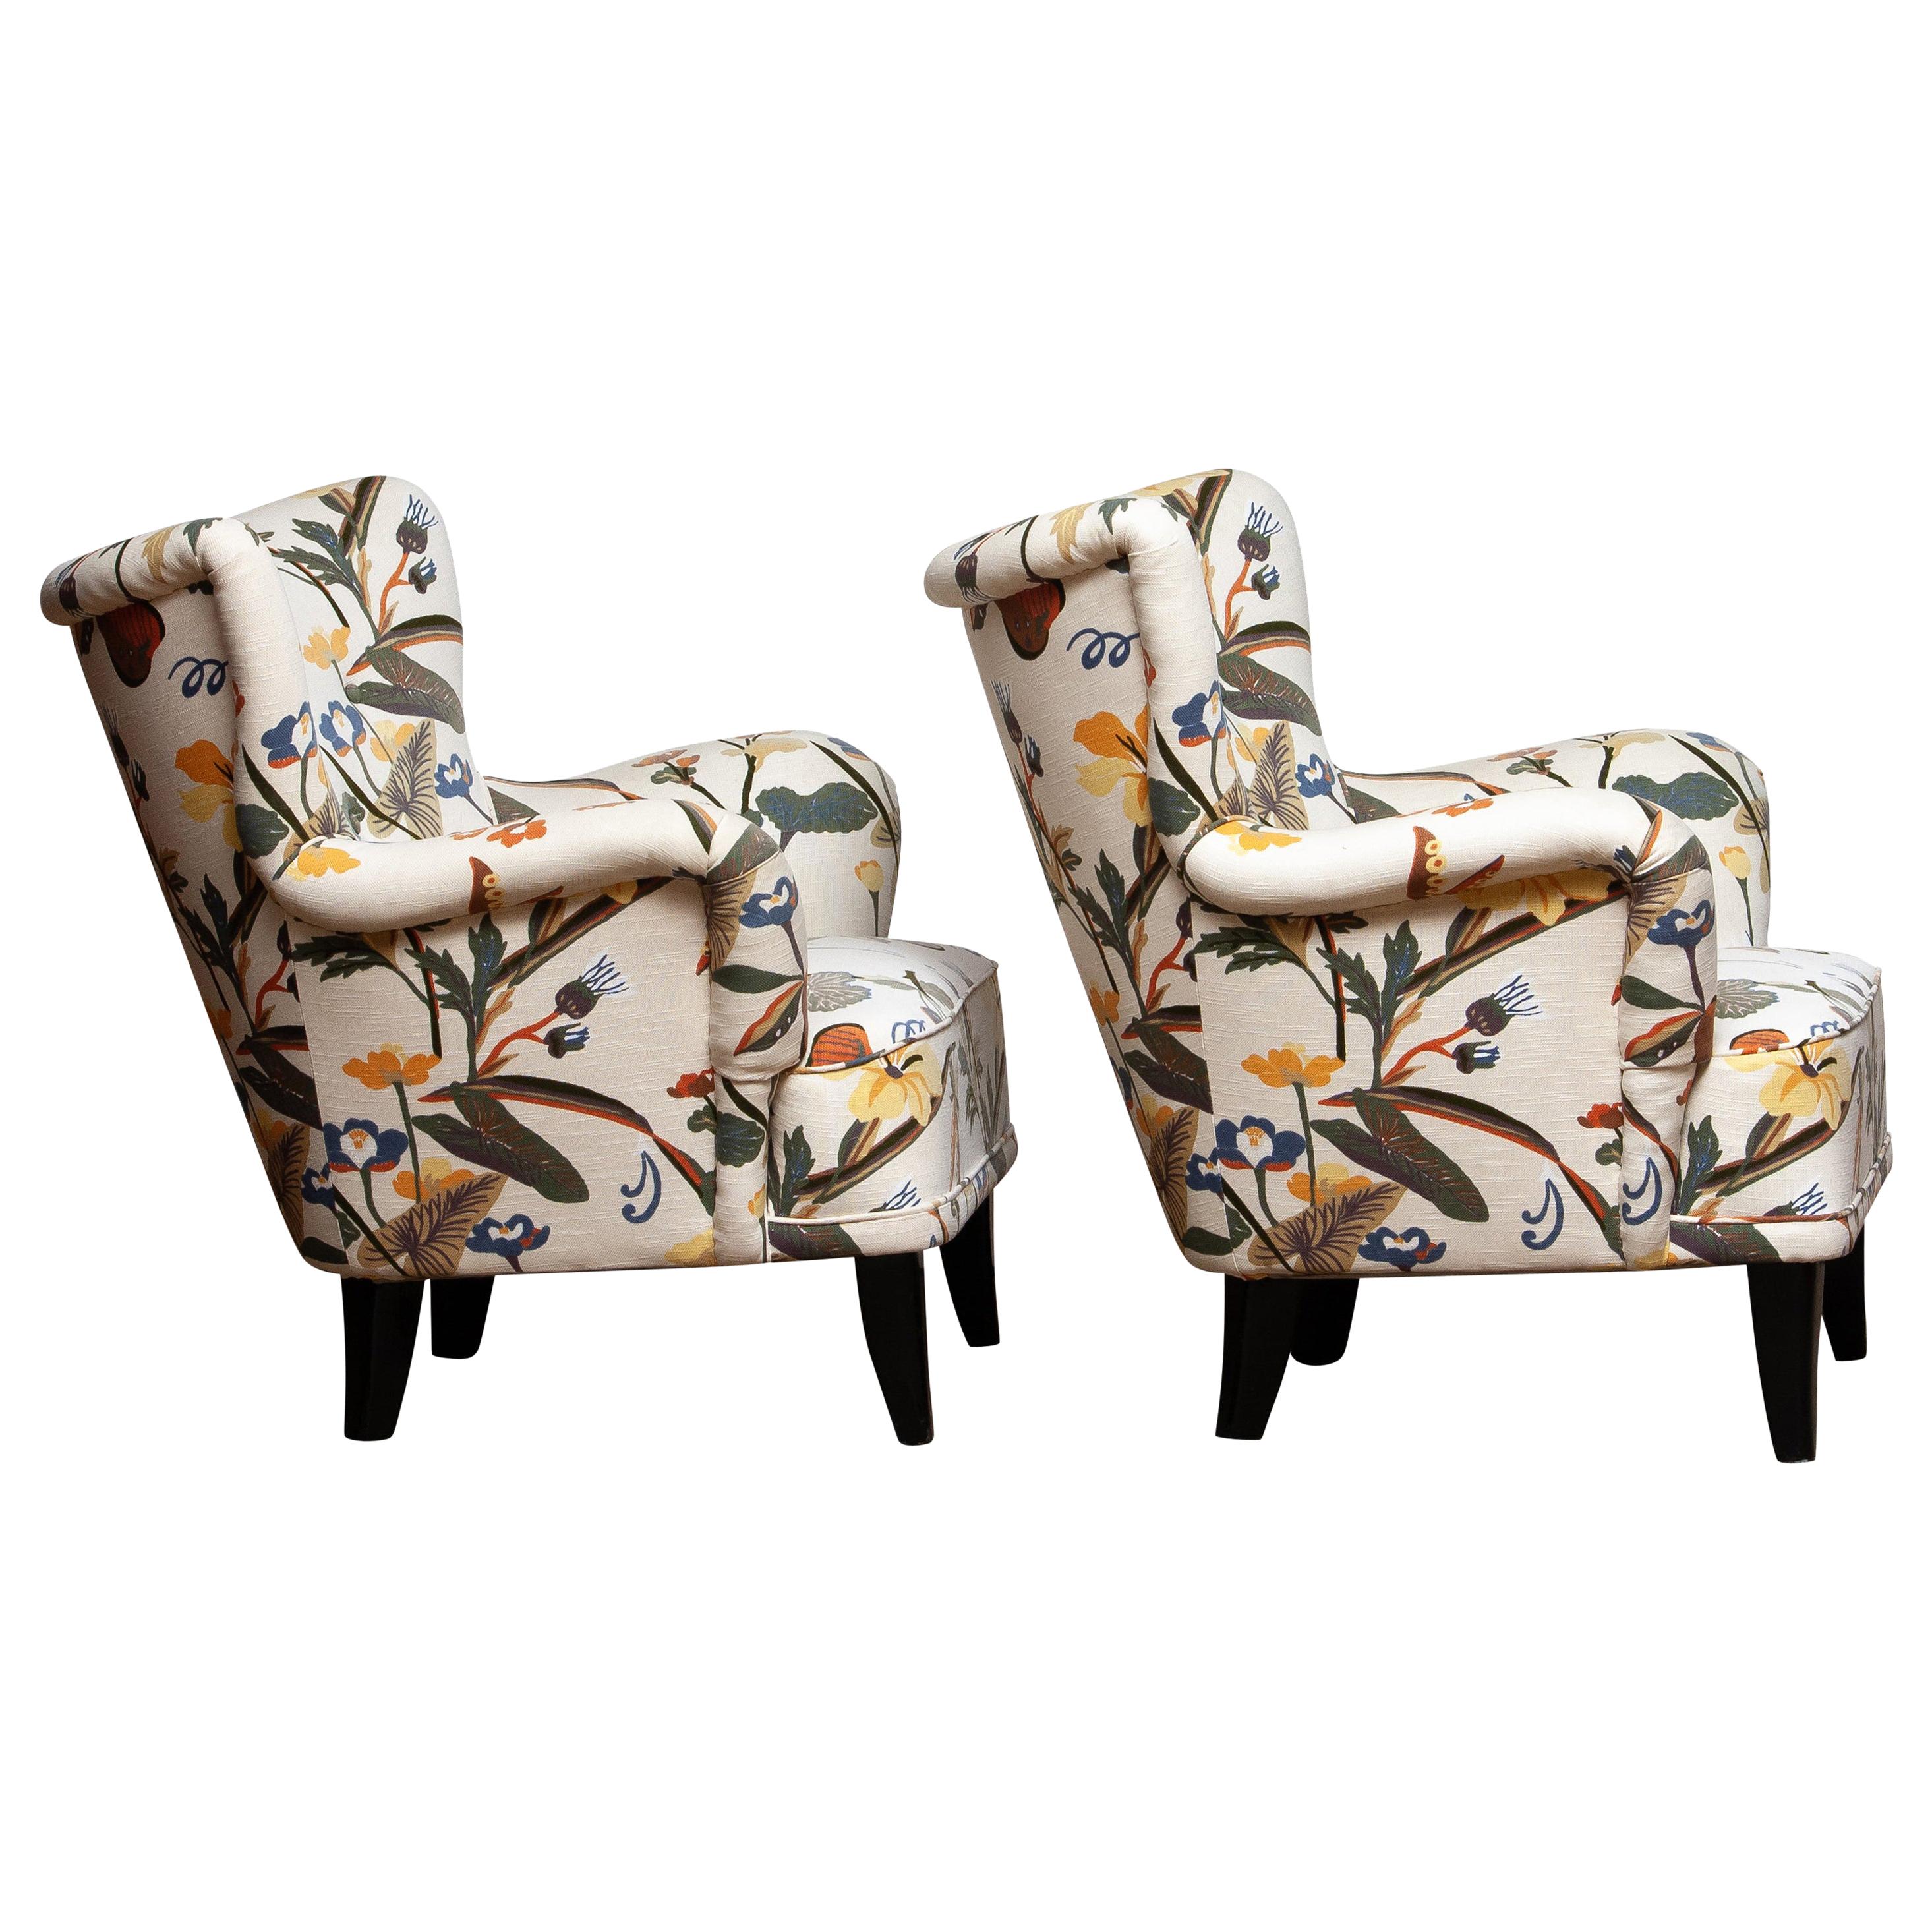 Set of two beautiful 1940s-1950s lounge / club chairs upholstered, in a later period, with the typical floral print fabric designed by Josef Frank.
The chairs are designed by Ilmari Lappalainen for Asko in Finland
The overall condition is good.